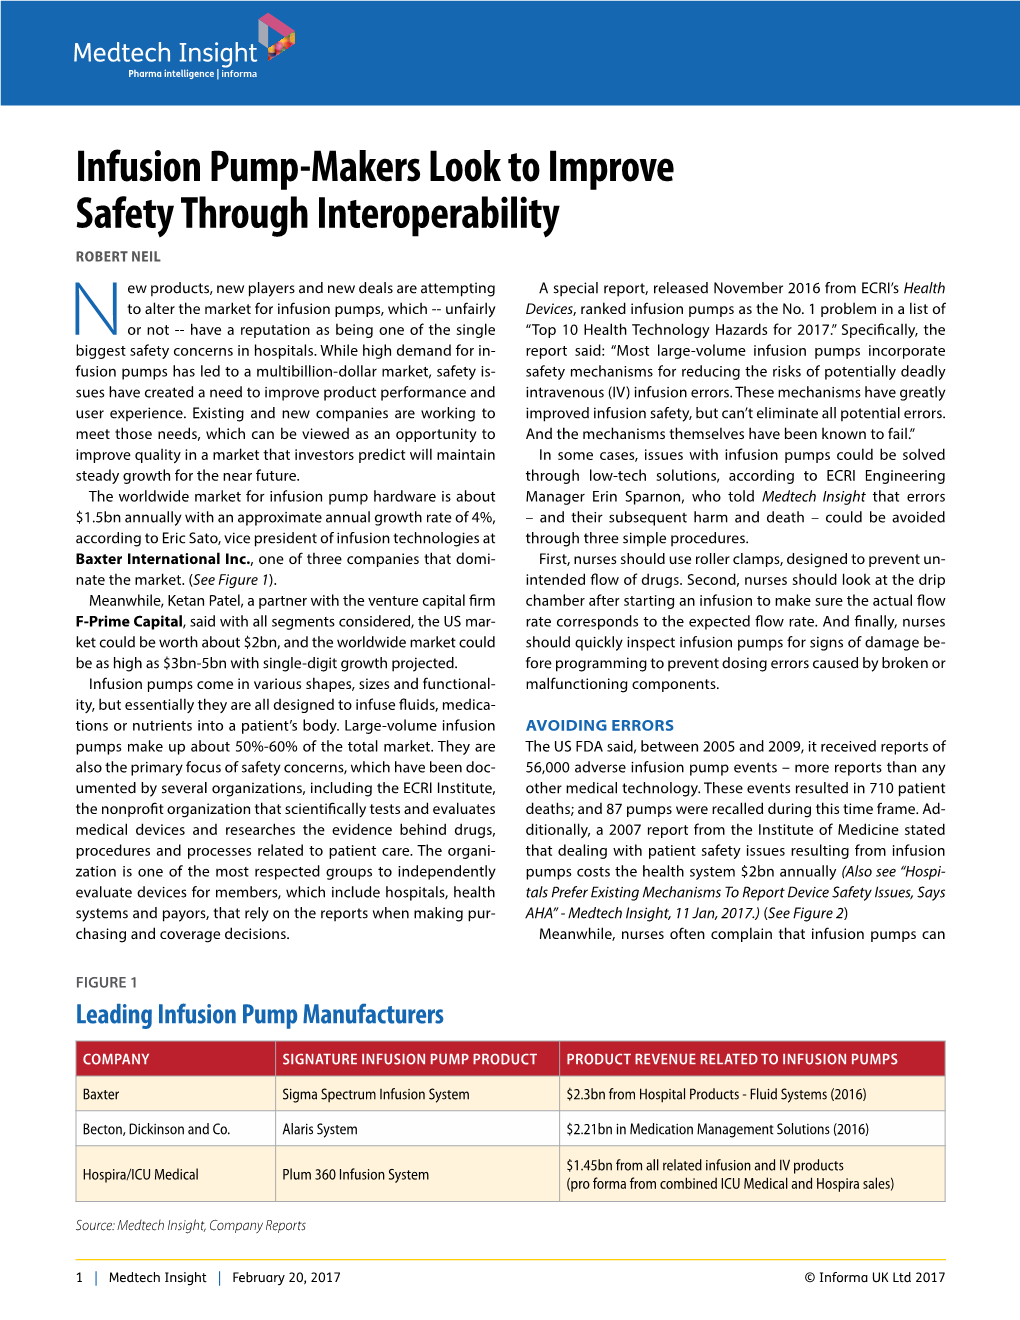 Infusion Pump-Makers Look to Improve Safety Through Interoperability ROBERT NEIL